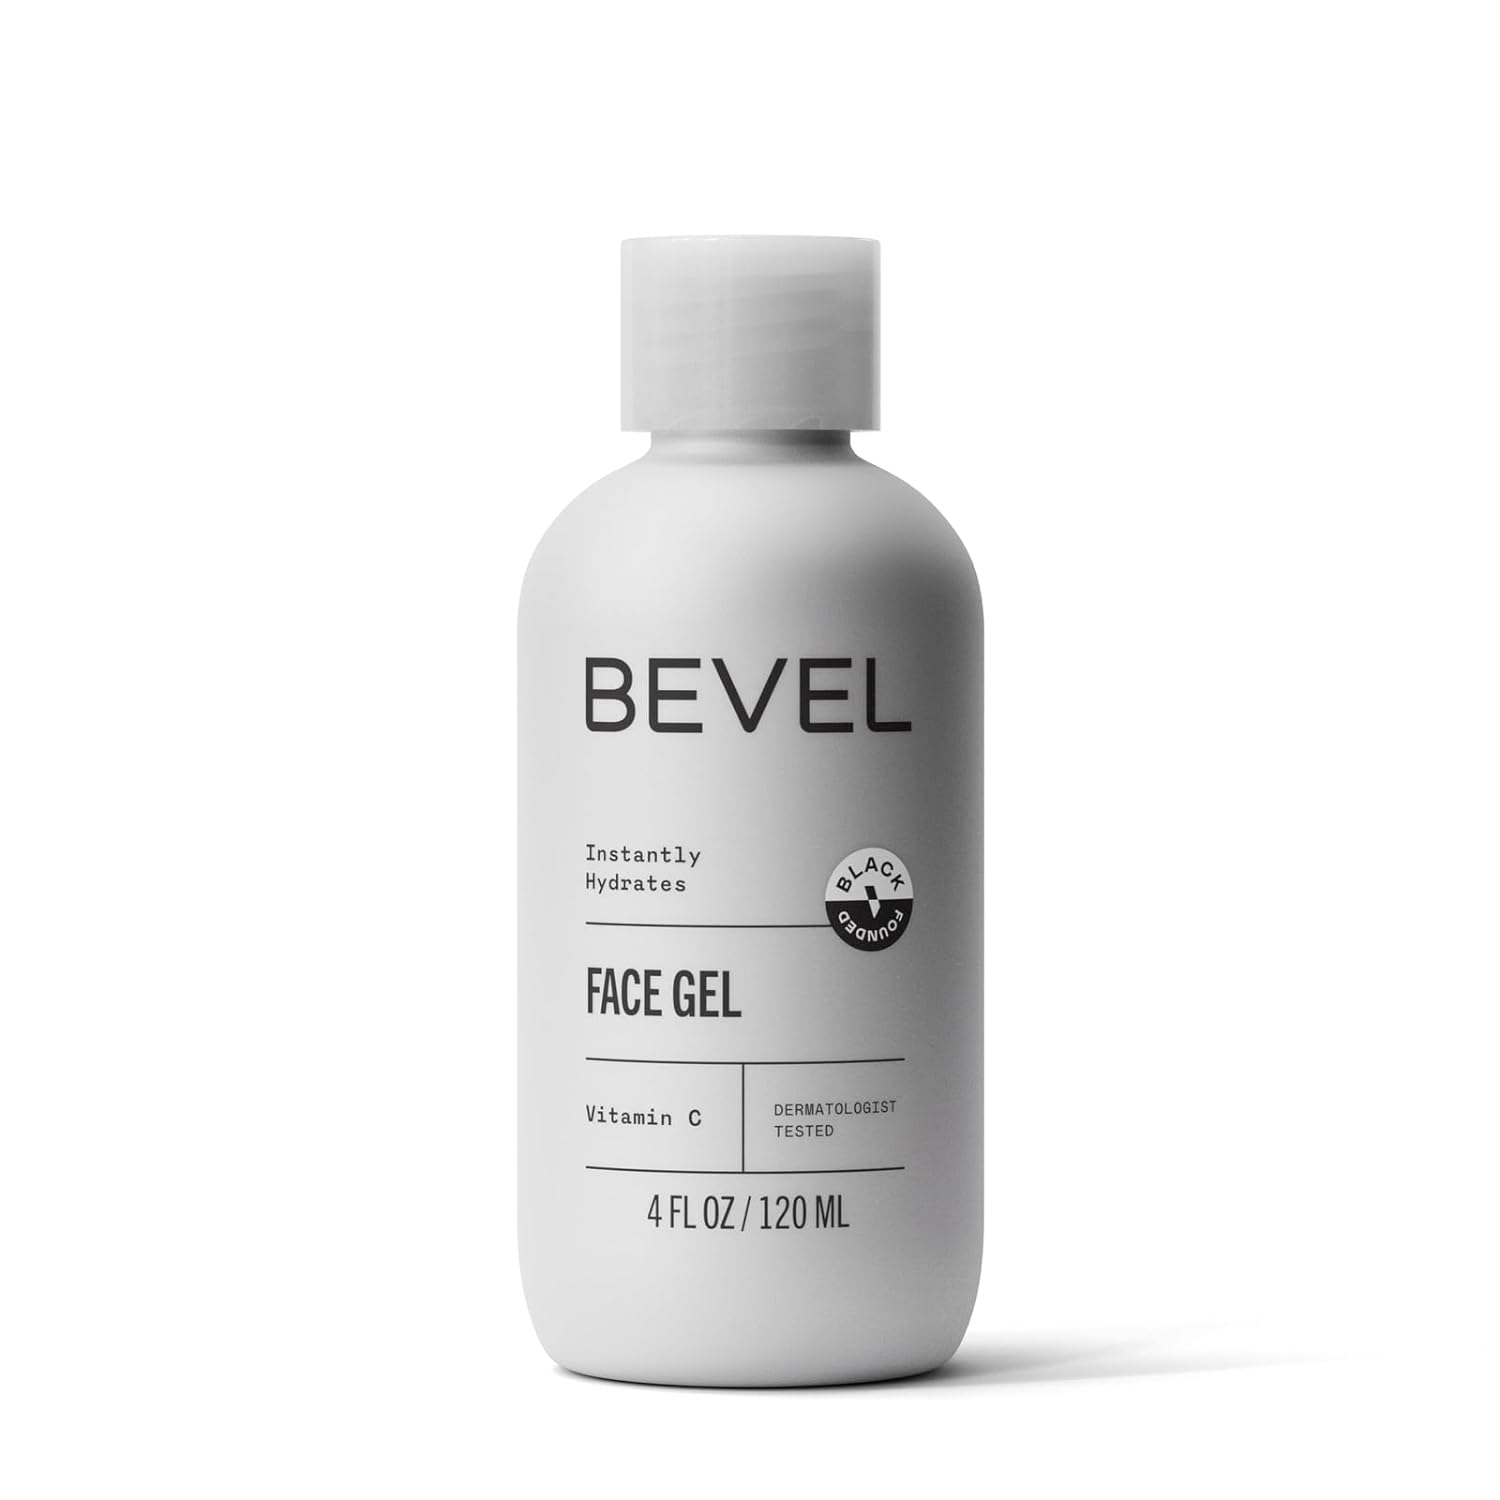 Bevel Face Moisturizer for Men with Vitamin C and Tea Tree Oil, Clear, Lightweight Face Lotion Gel, Improves Dry, Oily and Sensitive Skin, 4 Fl Oz (Packaging May Vary)